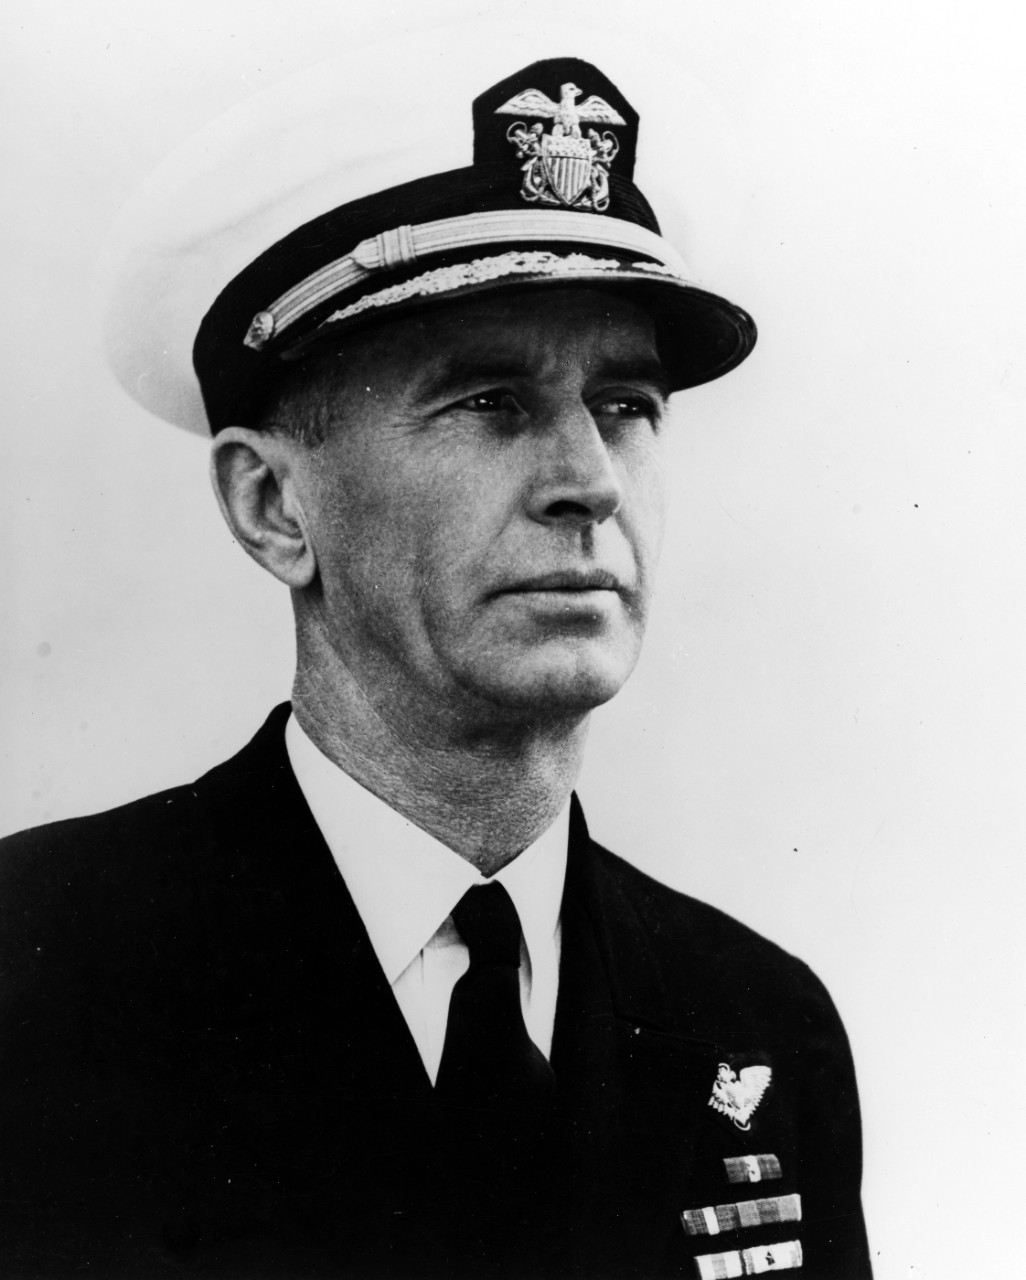 Photo #: 80-G-23712  Admiral Ernest J. King, USN, Chief of Naval Operations and Commander in Chief, U.S. Fleet  